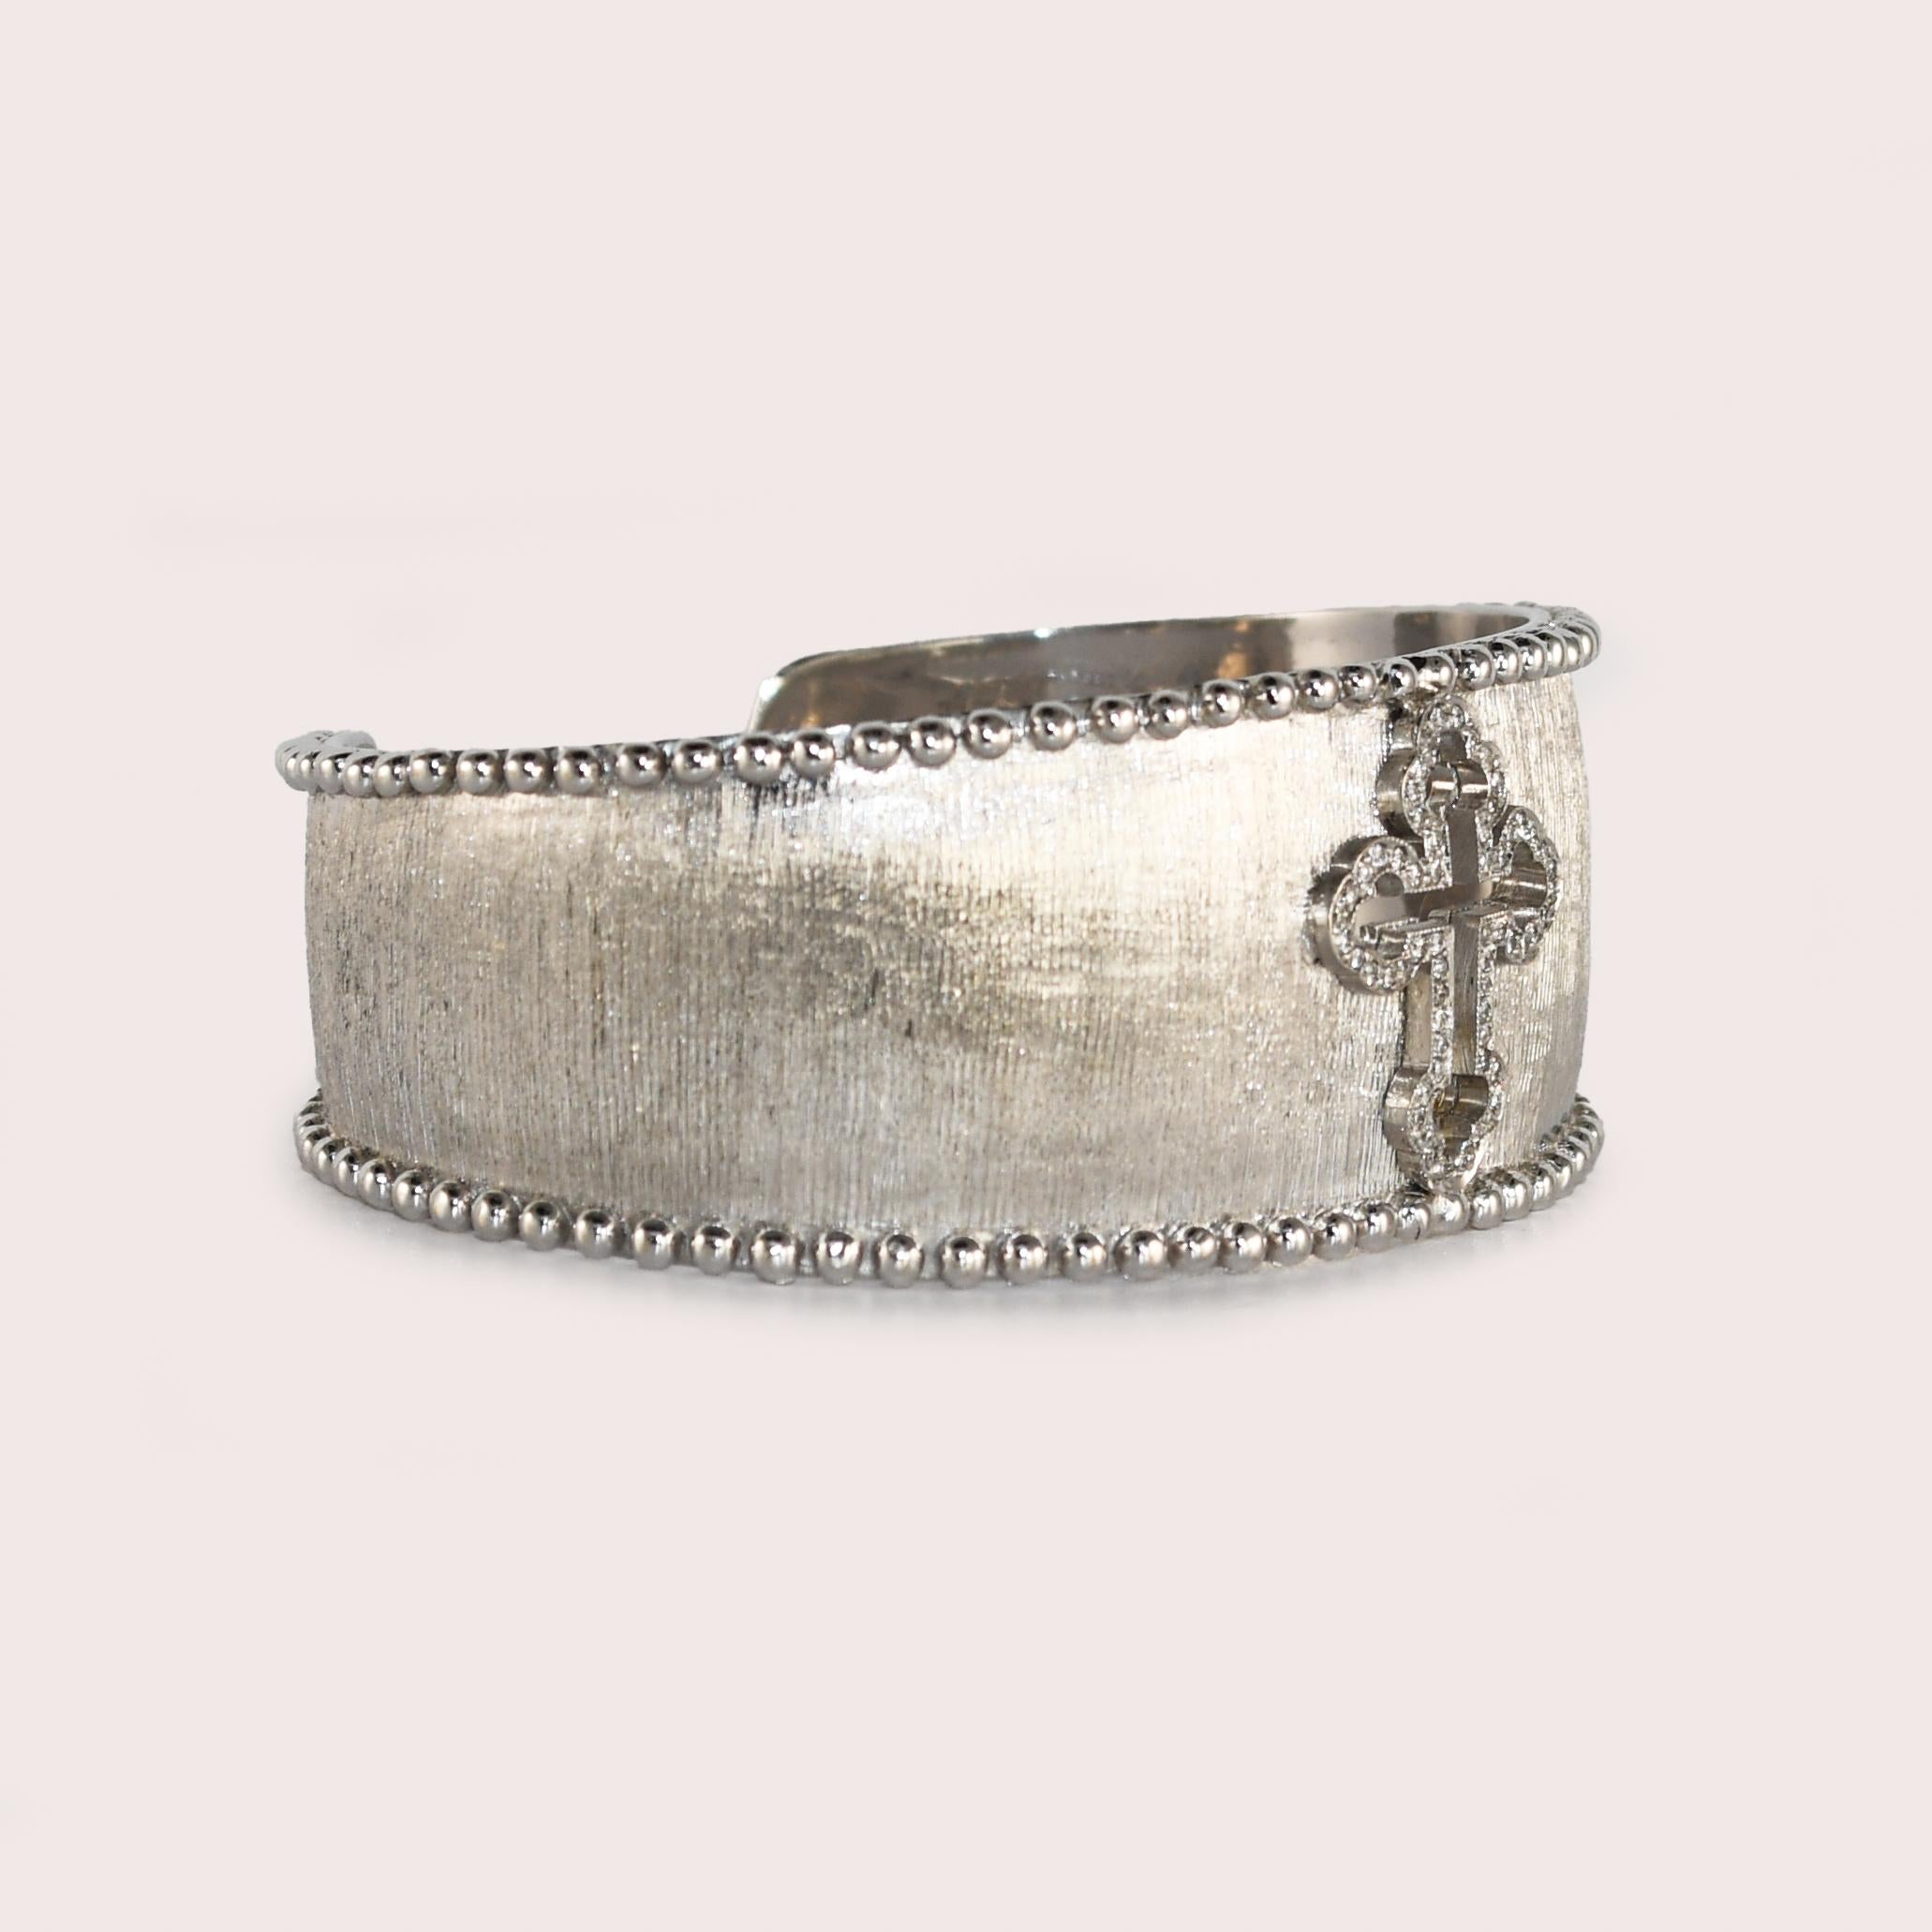 Ladies 18k white gold designer bracelet by Jude Frances.
The bangle tests 18k and weighs 55 grams.
There are round brilliant cut diamonds set in the cross design, .20 to .25 total carats, G to H color, Vs to Si clarity.
Attractive brush finish.
The